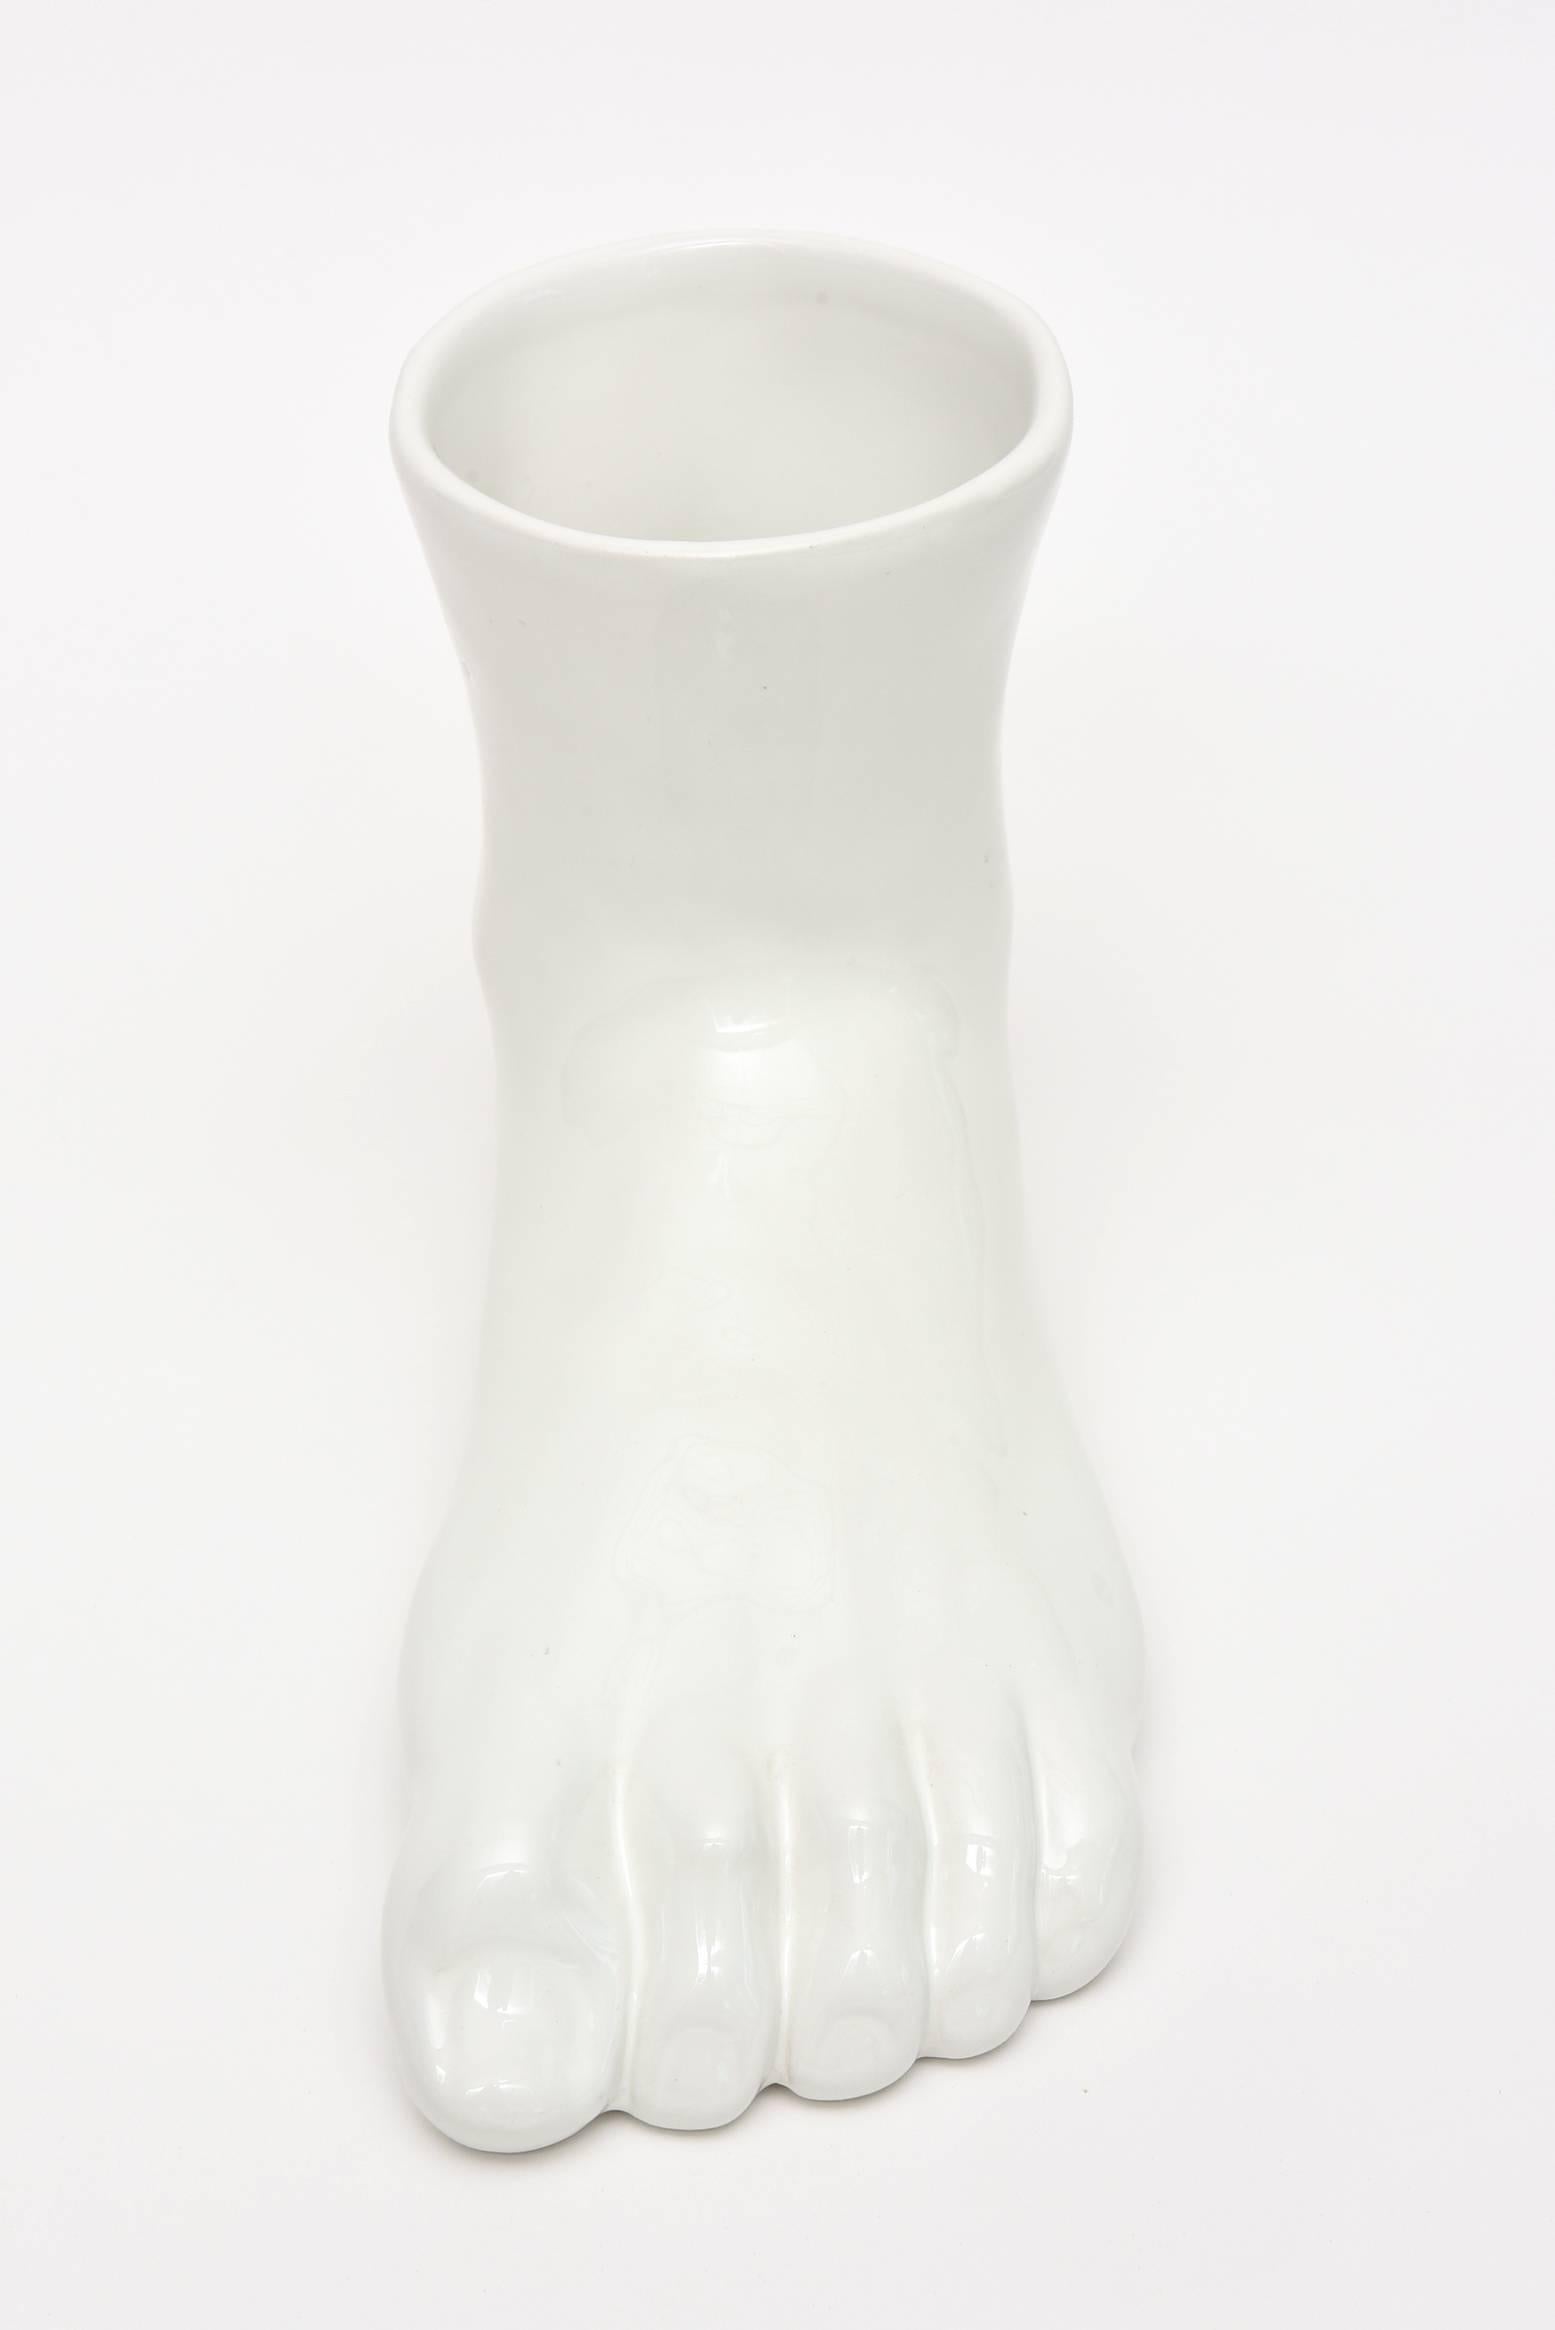 This Italian white ceramic Fornasetti style foot vase/ vessel is an eye catcher.
It is marked Made In Italy.
This could also be a great desk accessory to house pens and pencils...or even bread sticks for serving dinner. This makes a great holiday